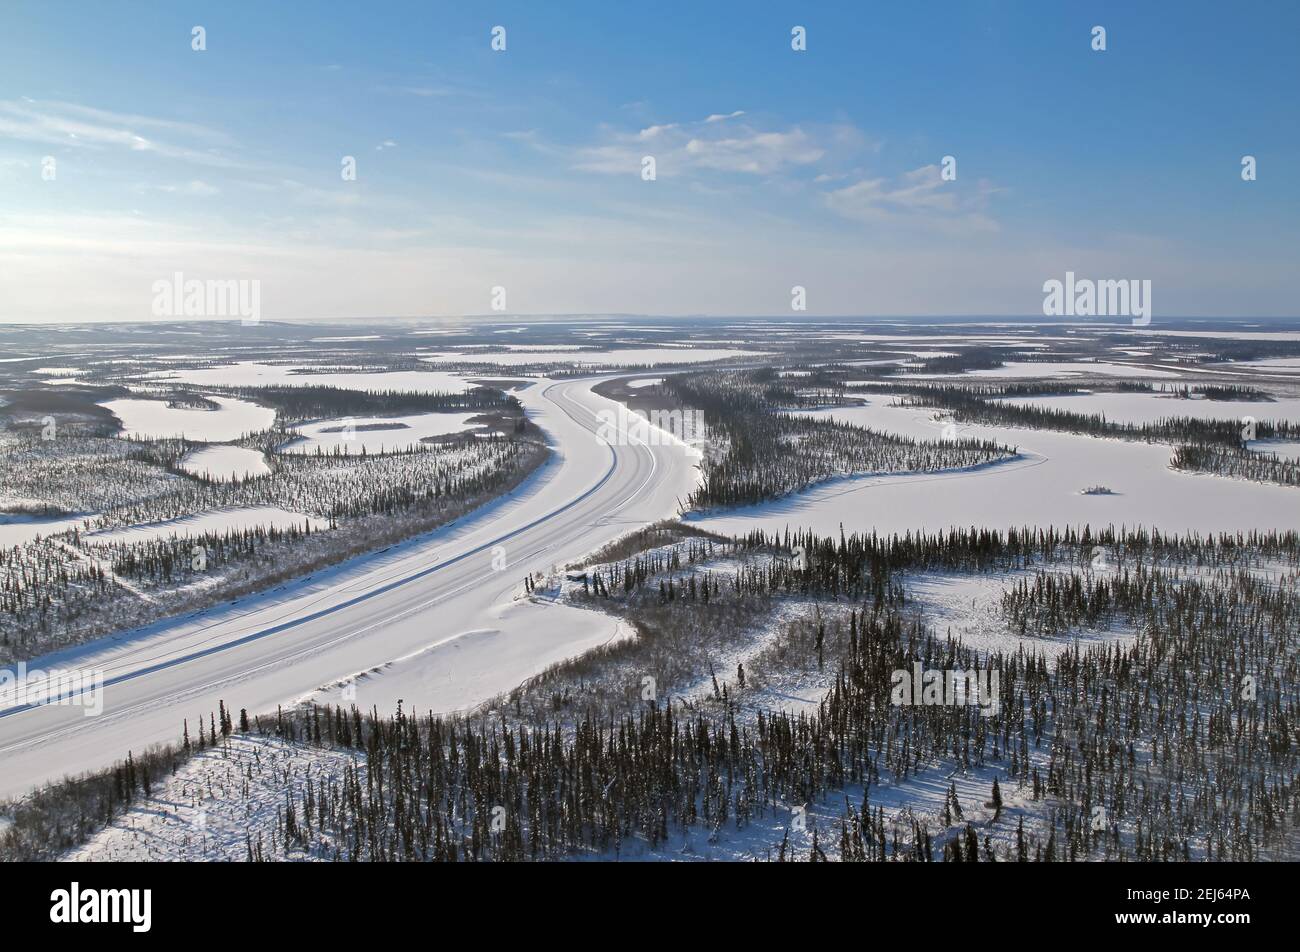 Aerial view of Mackenzie River ice road in winter, connecting communities in the Beaufort Delta, Northwest Territories, Canada's western Arctic. Stock Photo